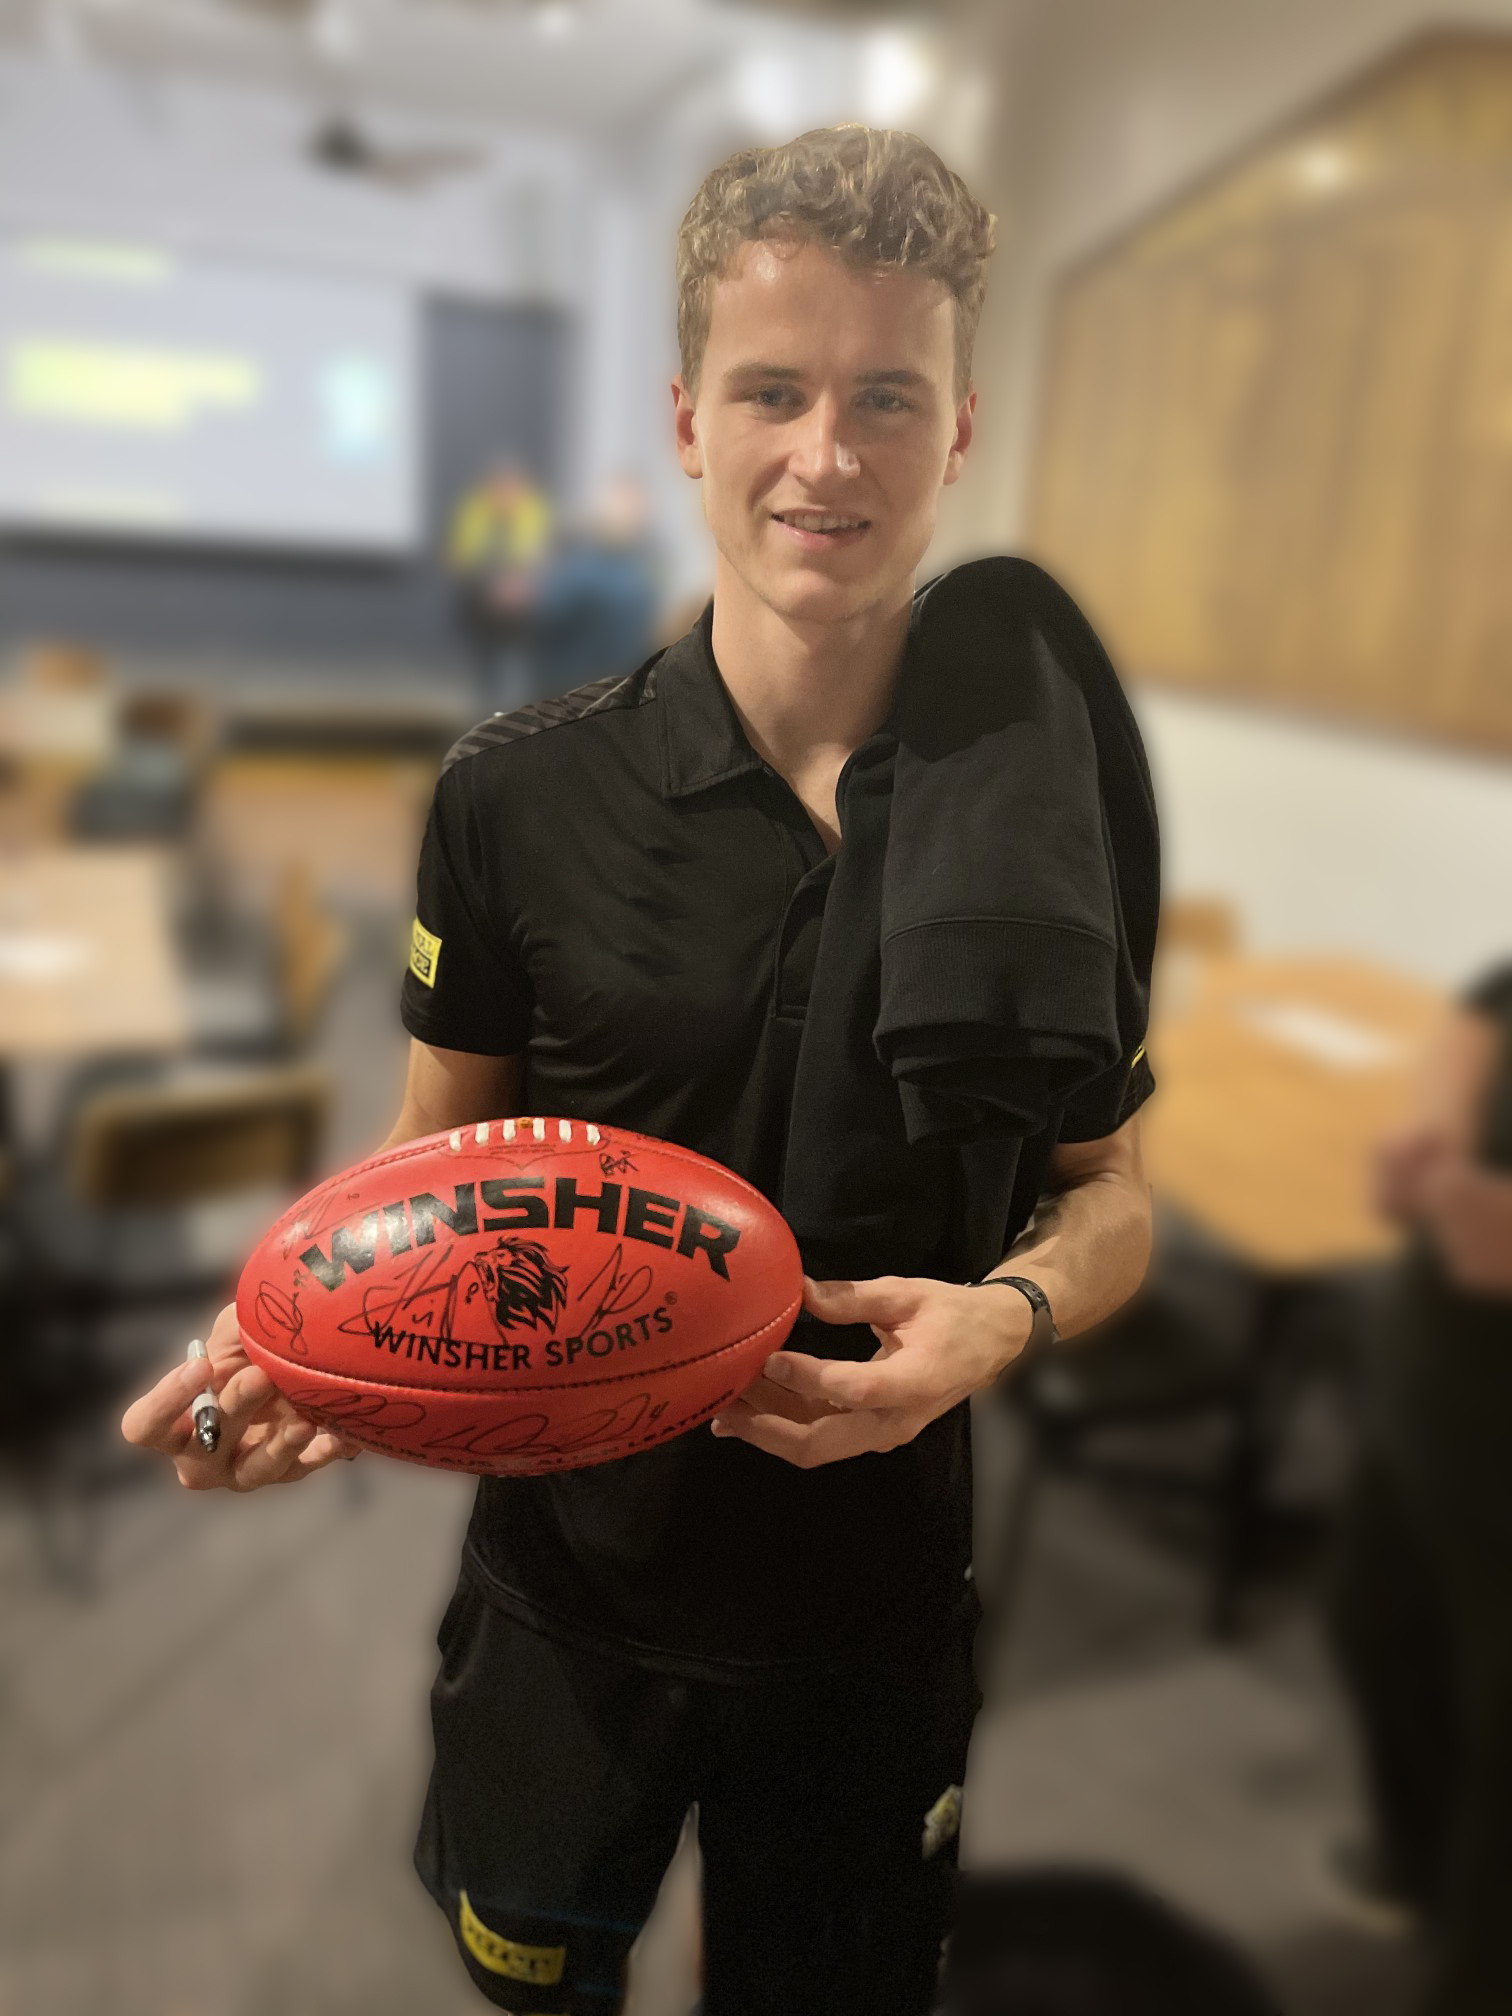 Richmond FC AFL team players at the launch of Winsher Sports Australian Rules Football